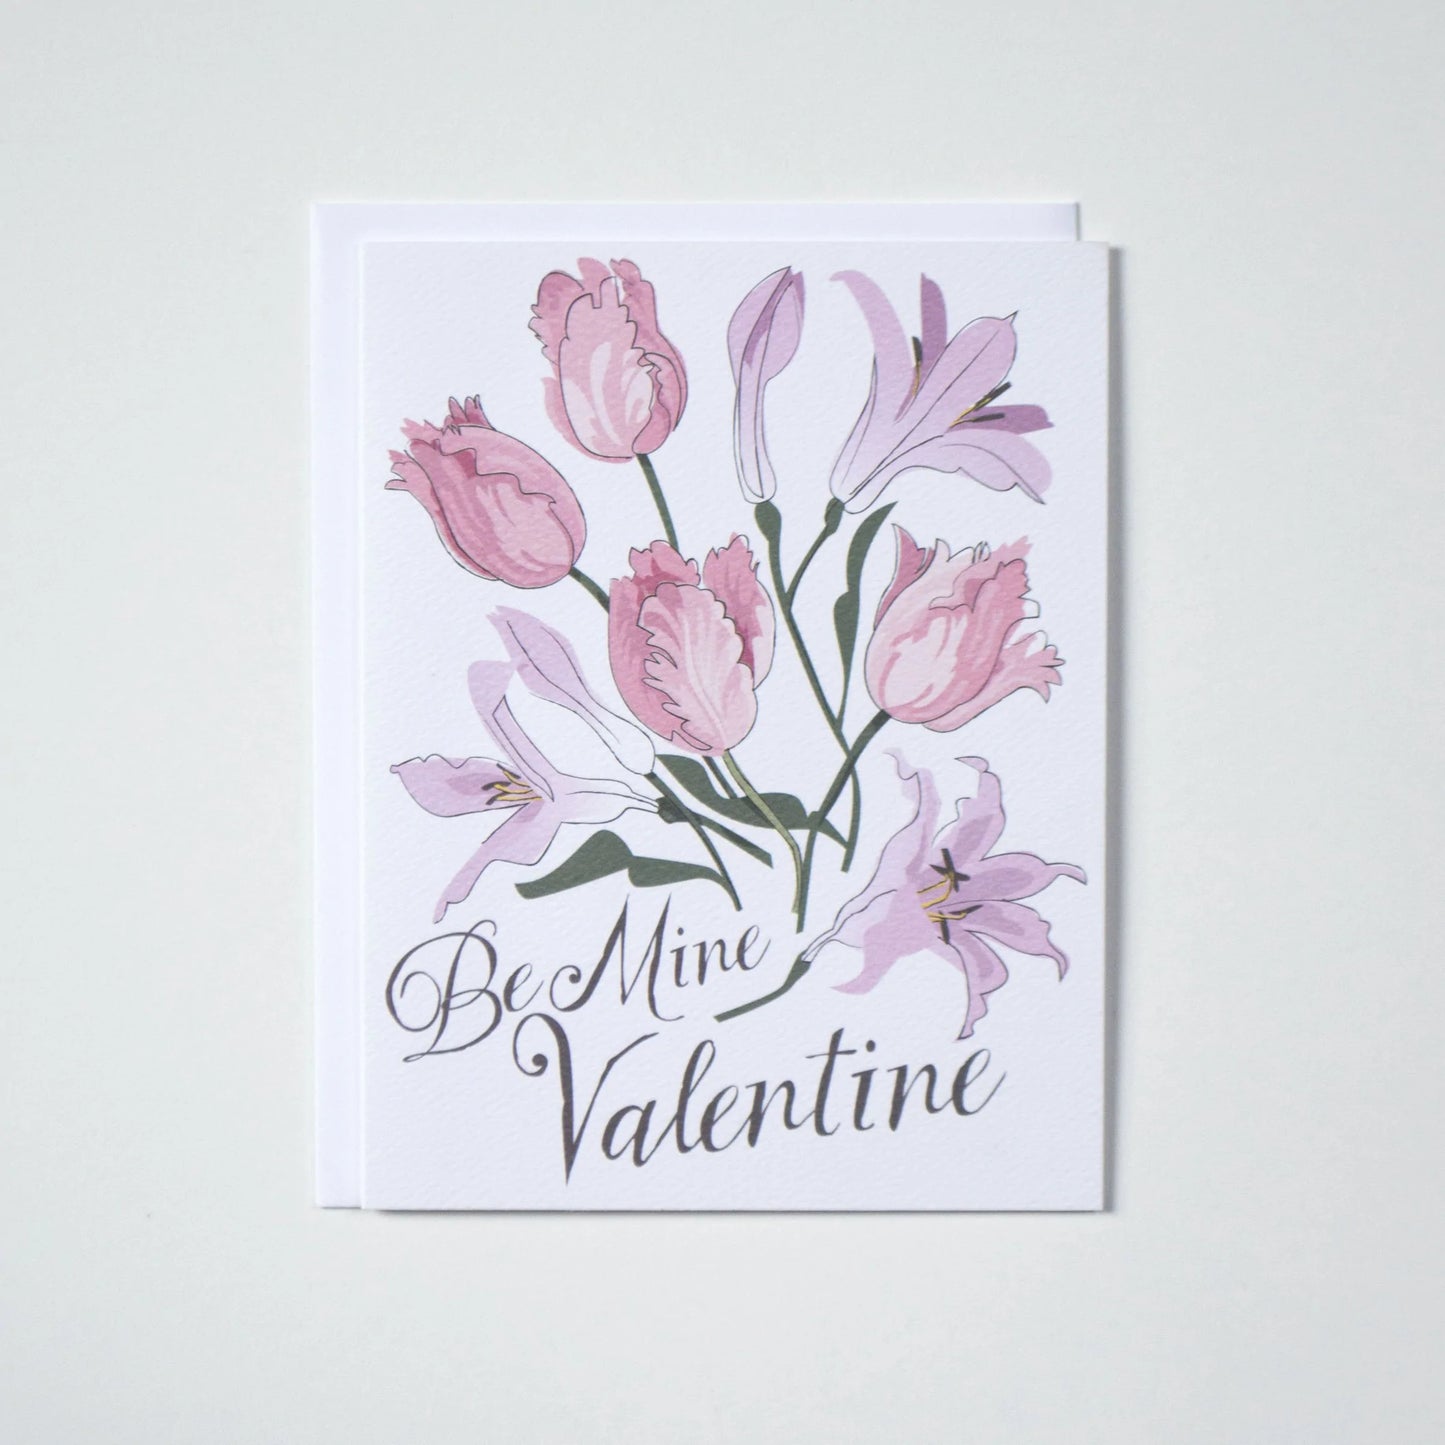 BE MINE TULIPS AND LILLIES VALENTINE CARD